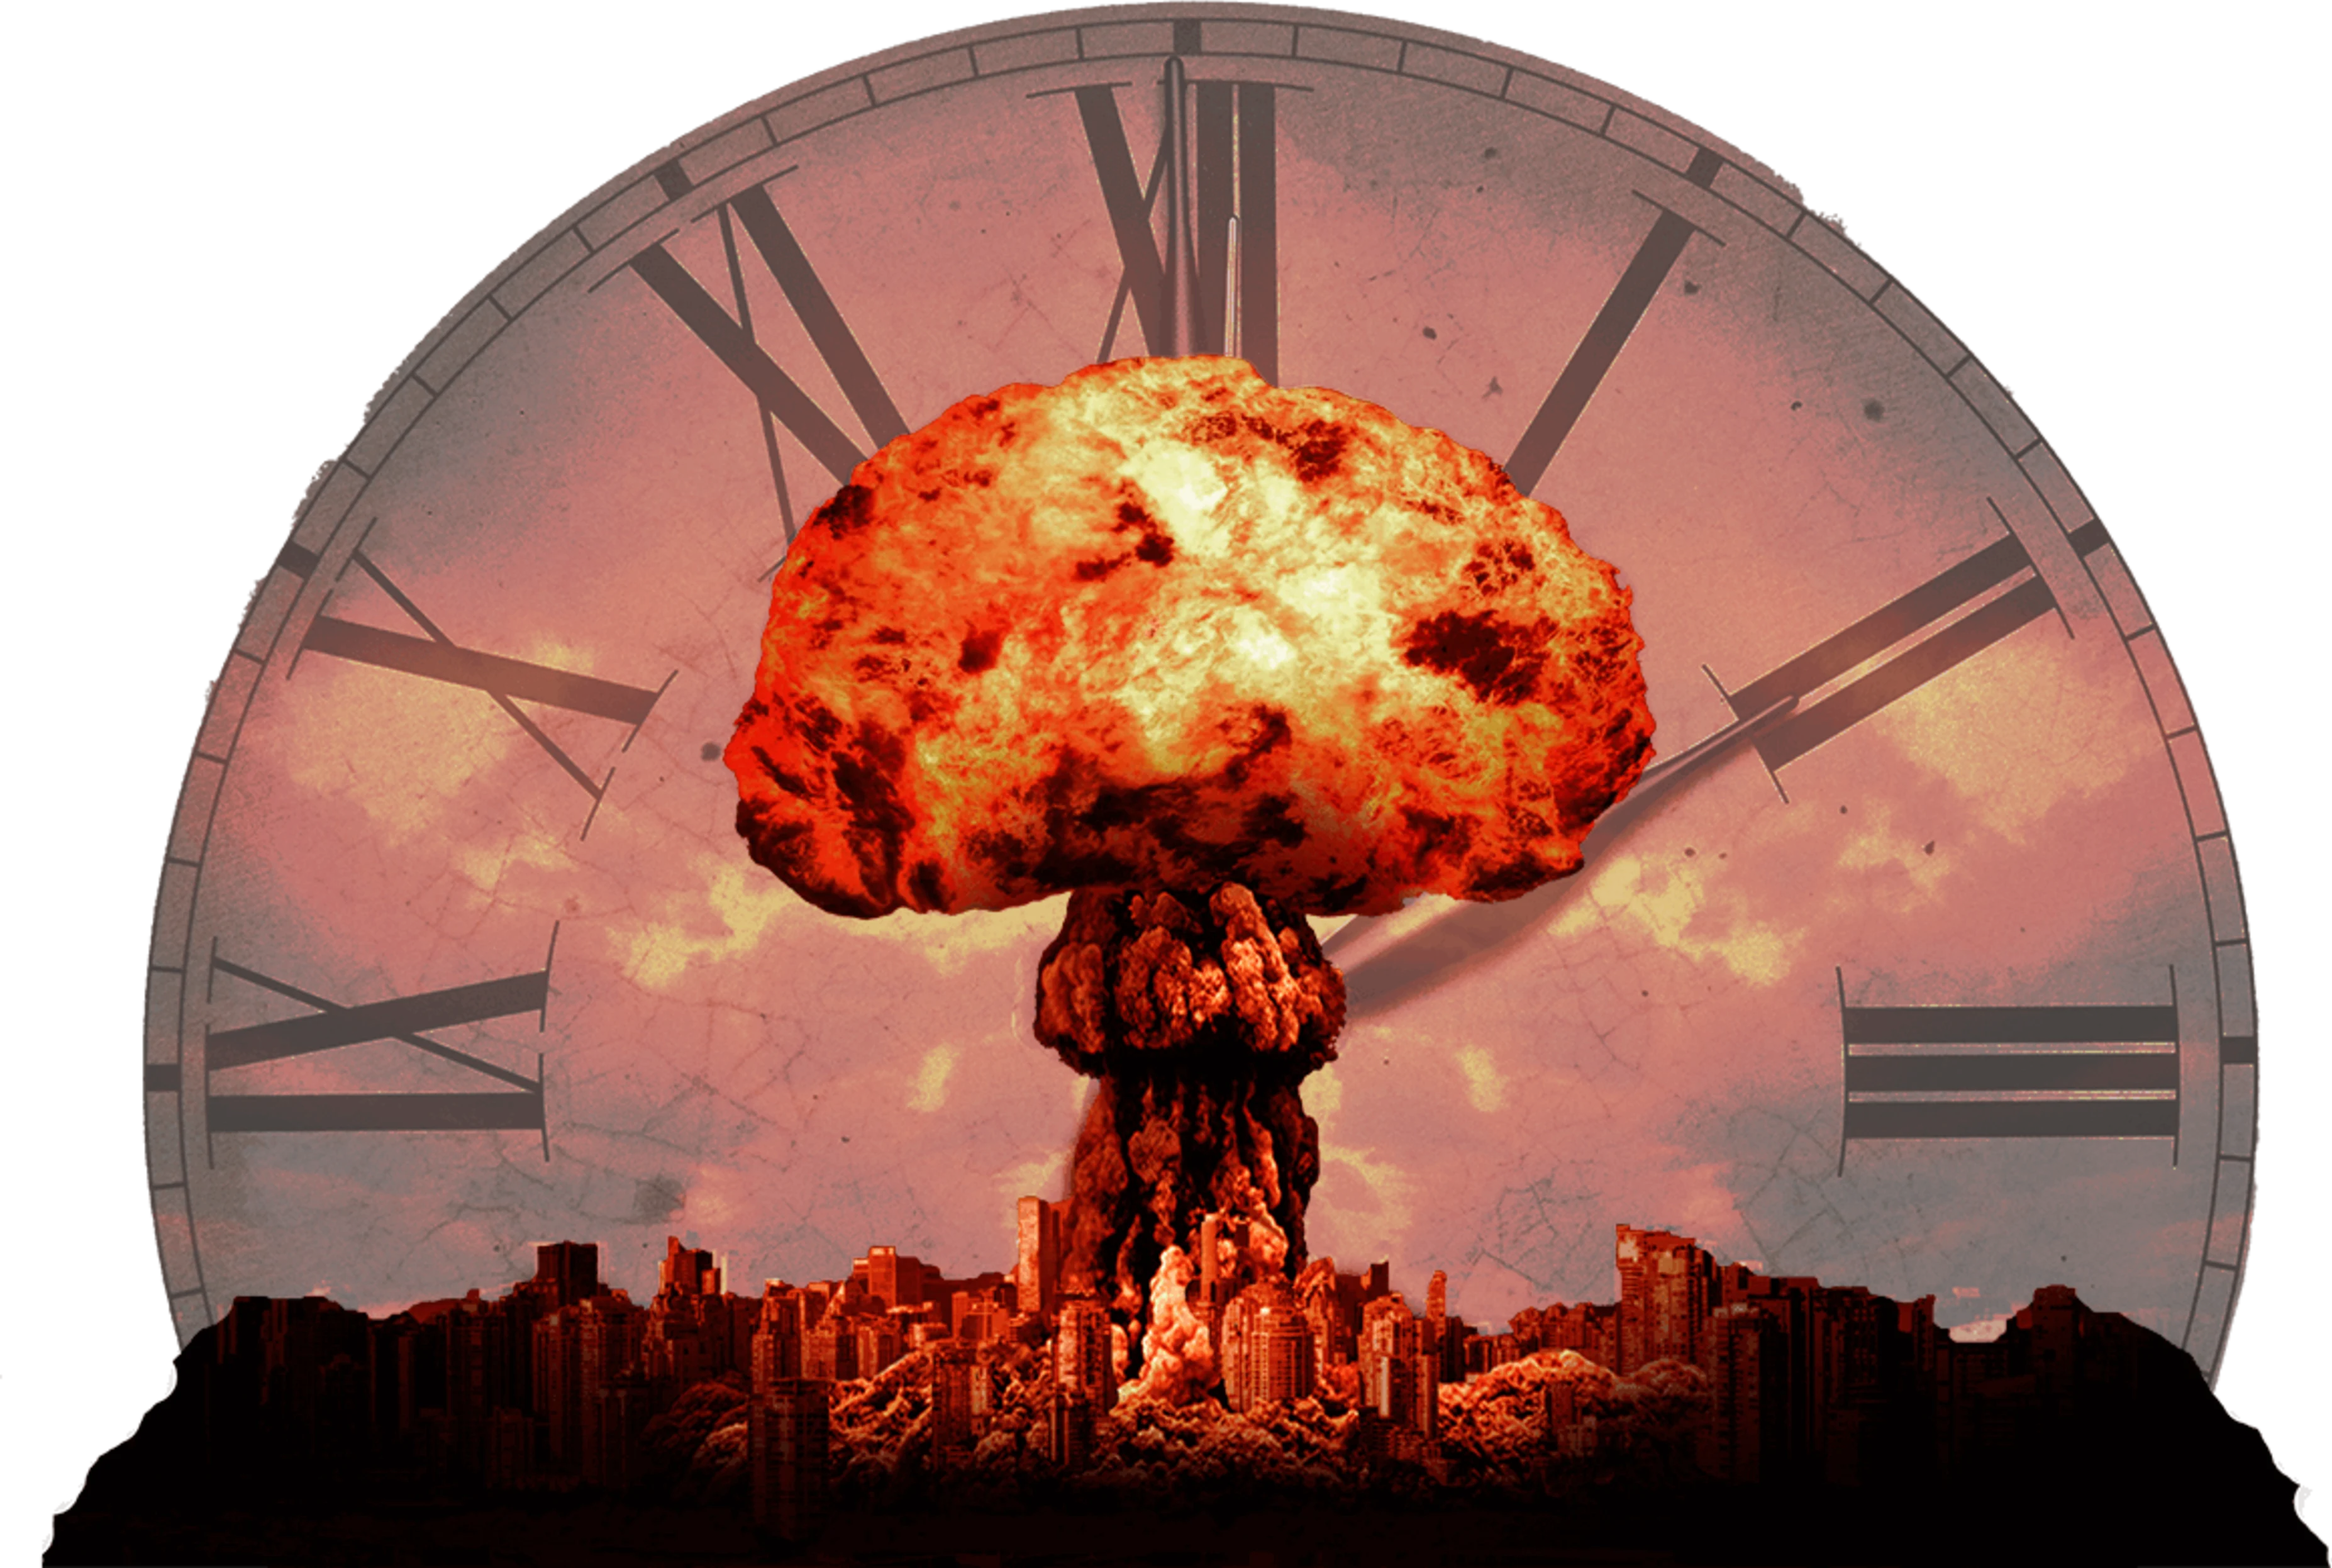 The Doomsday Clock: why the panic?